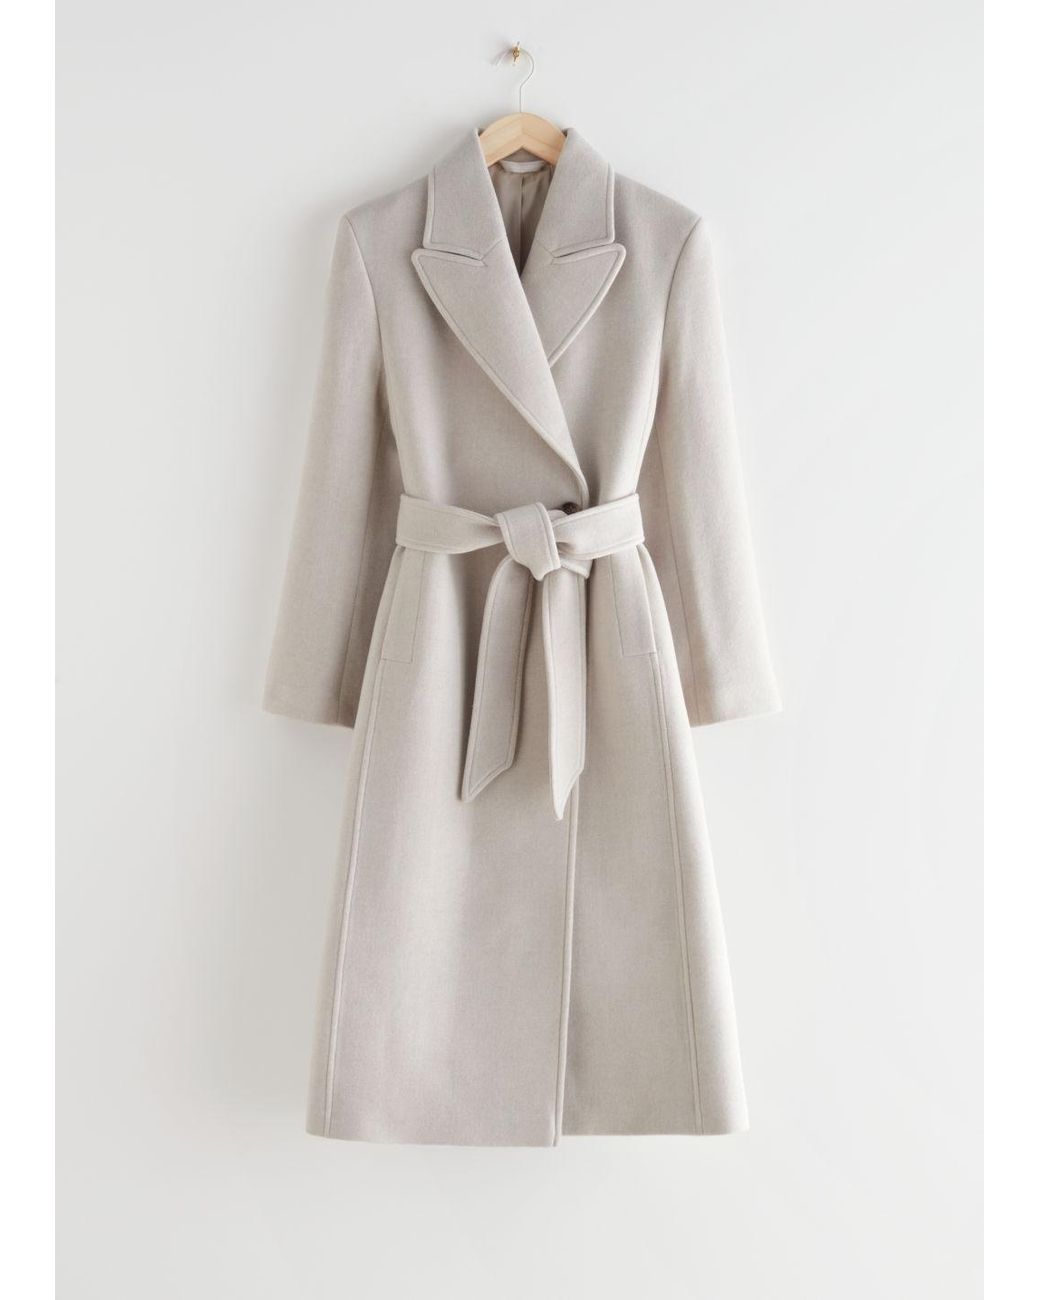 & Other Stories Belted Fitted Recycled Wool Coat in Beige (Natural ...